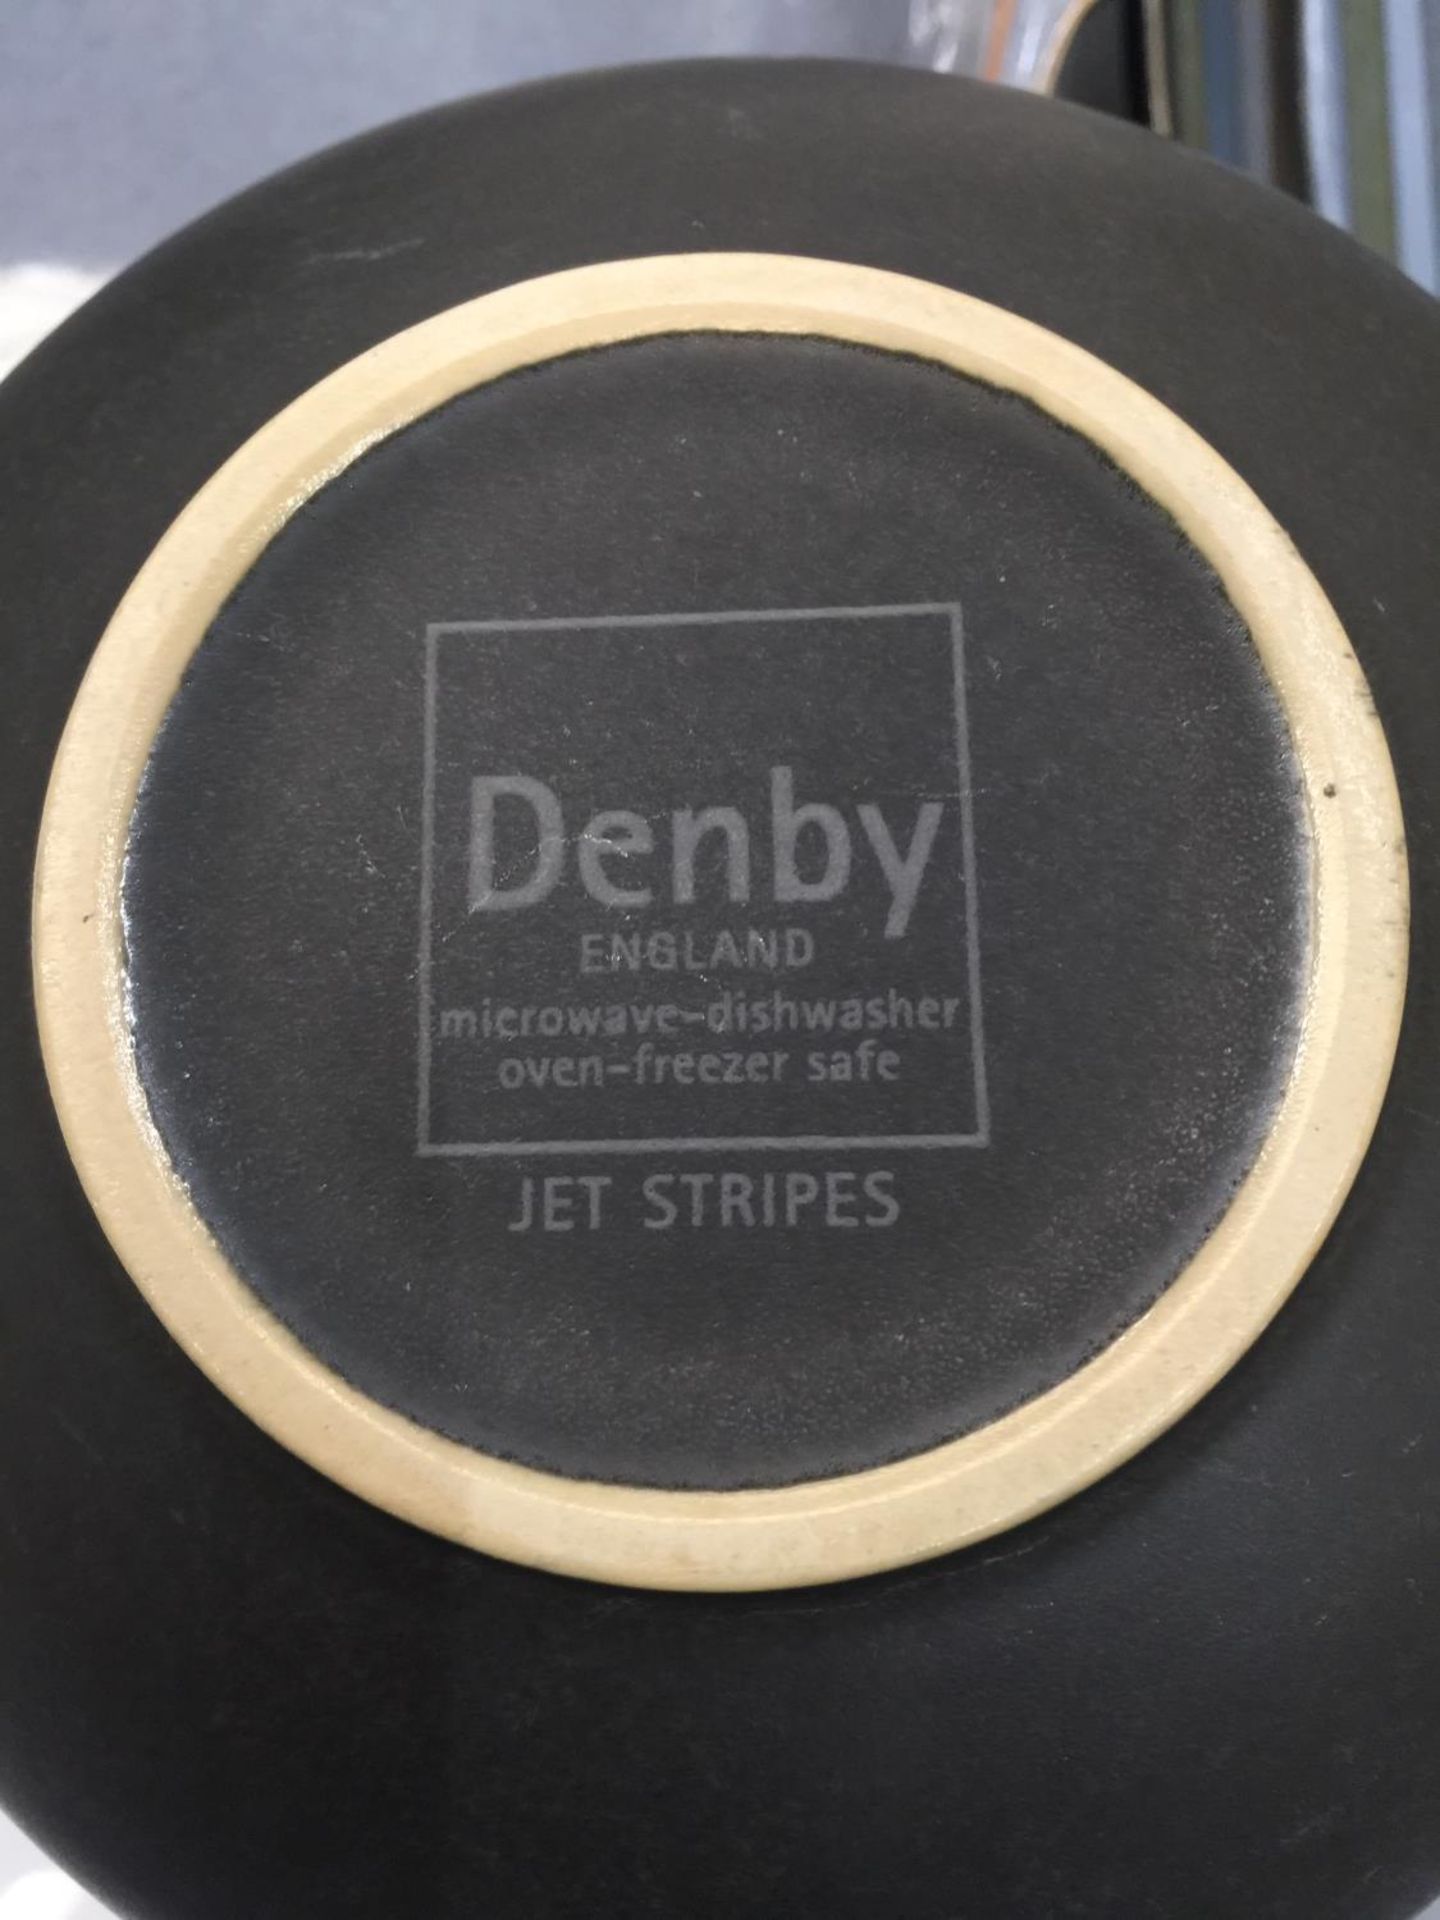 A LARGE QUANTITY OF DENBY 'JET STRIPES' DINNER WARE TO INCLUDE VARIOUS SIZES OF PLATES, BOWLS, - Image 5 of 5